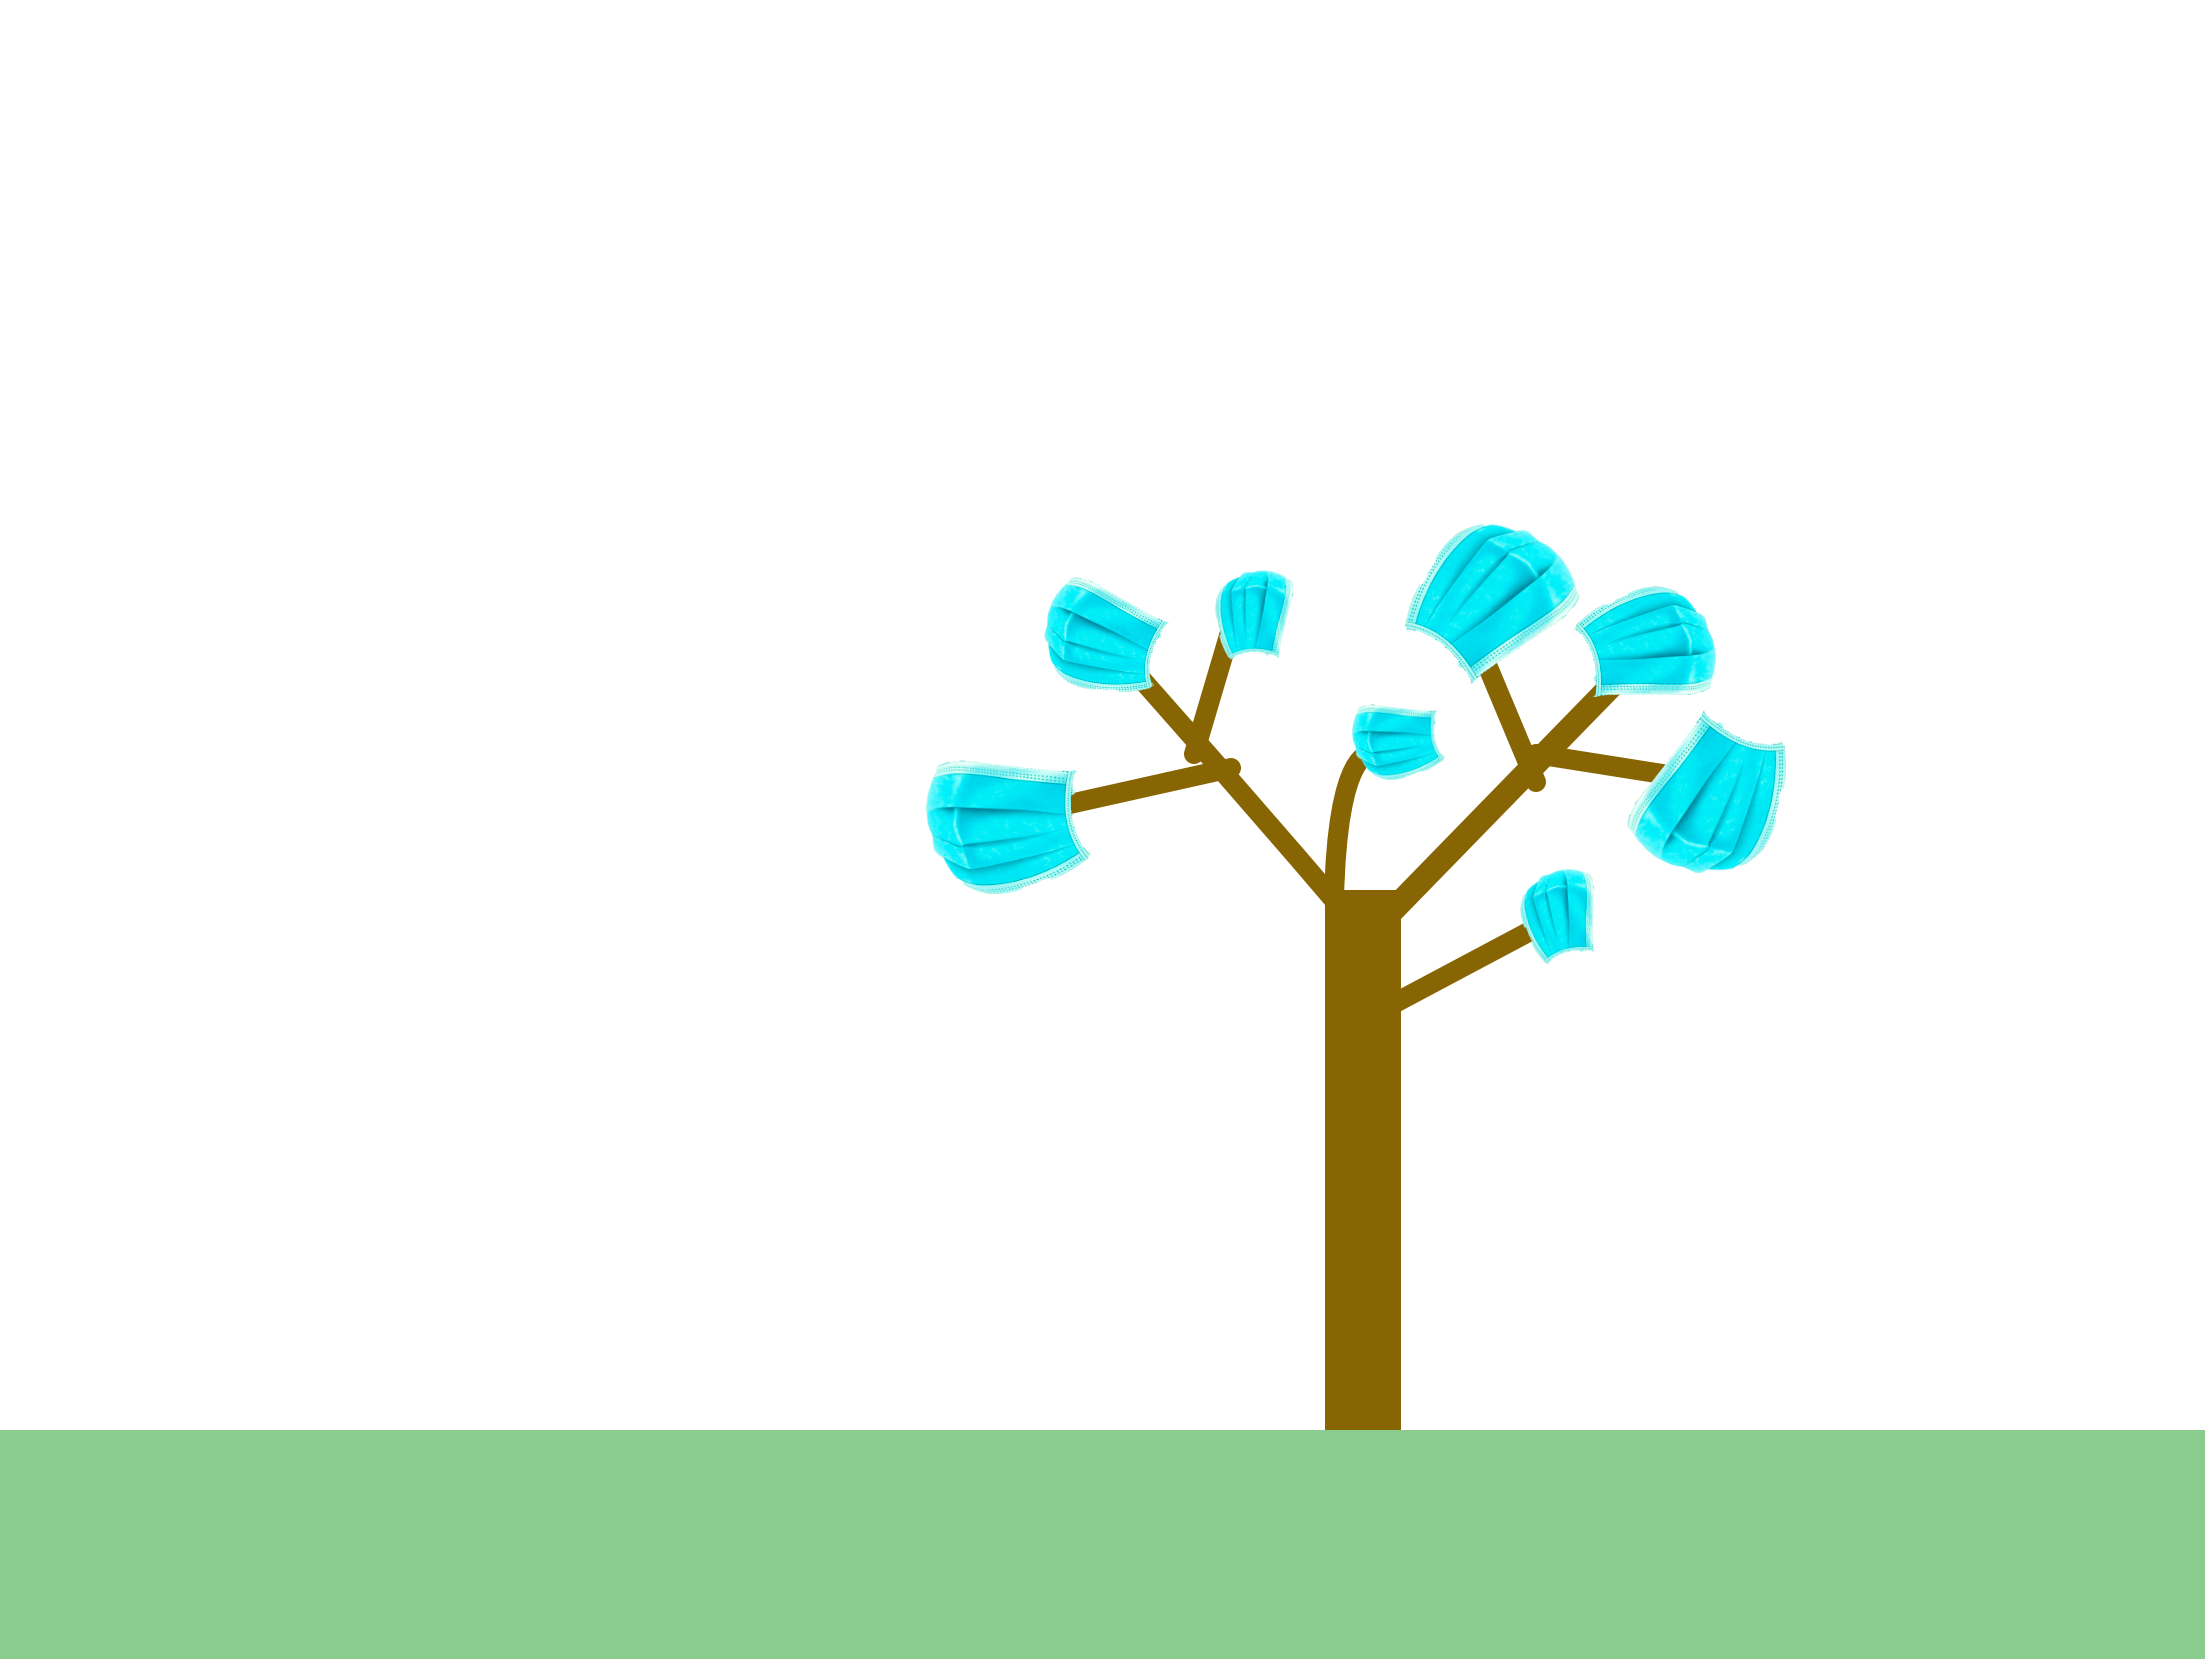 A tree with COVID masks as leafs